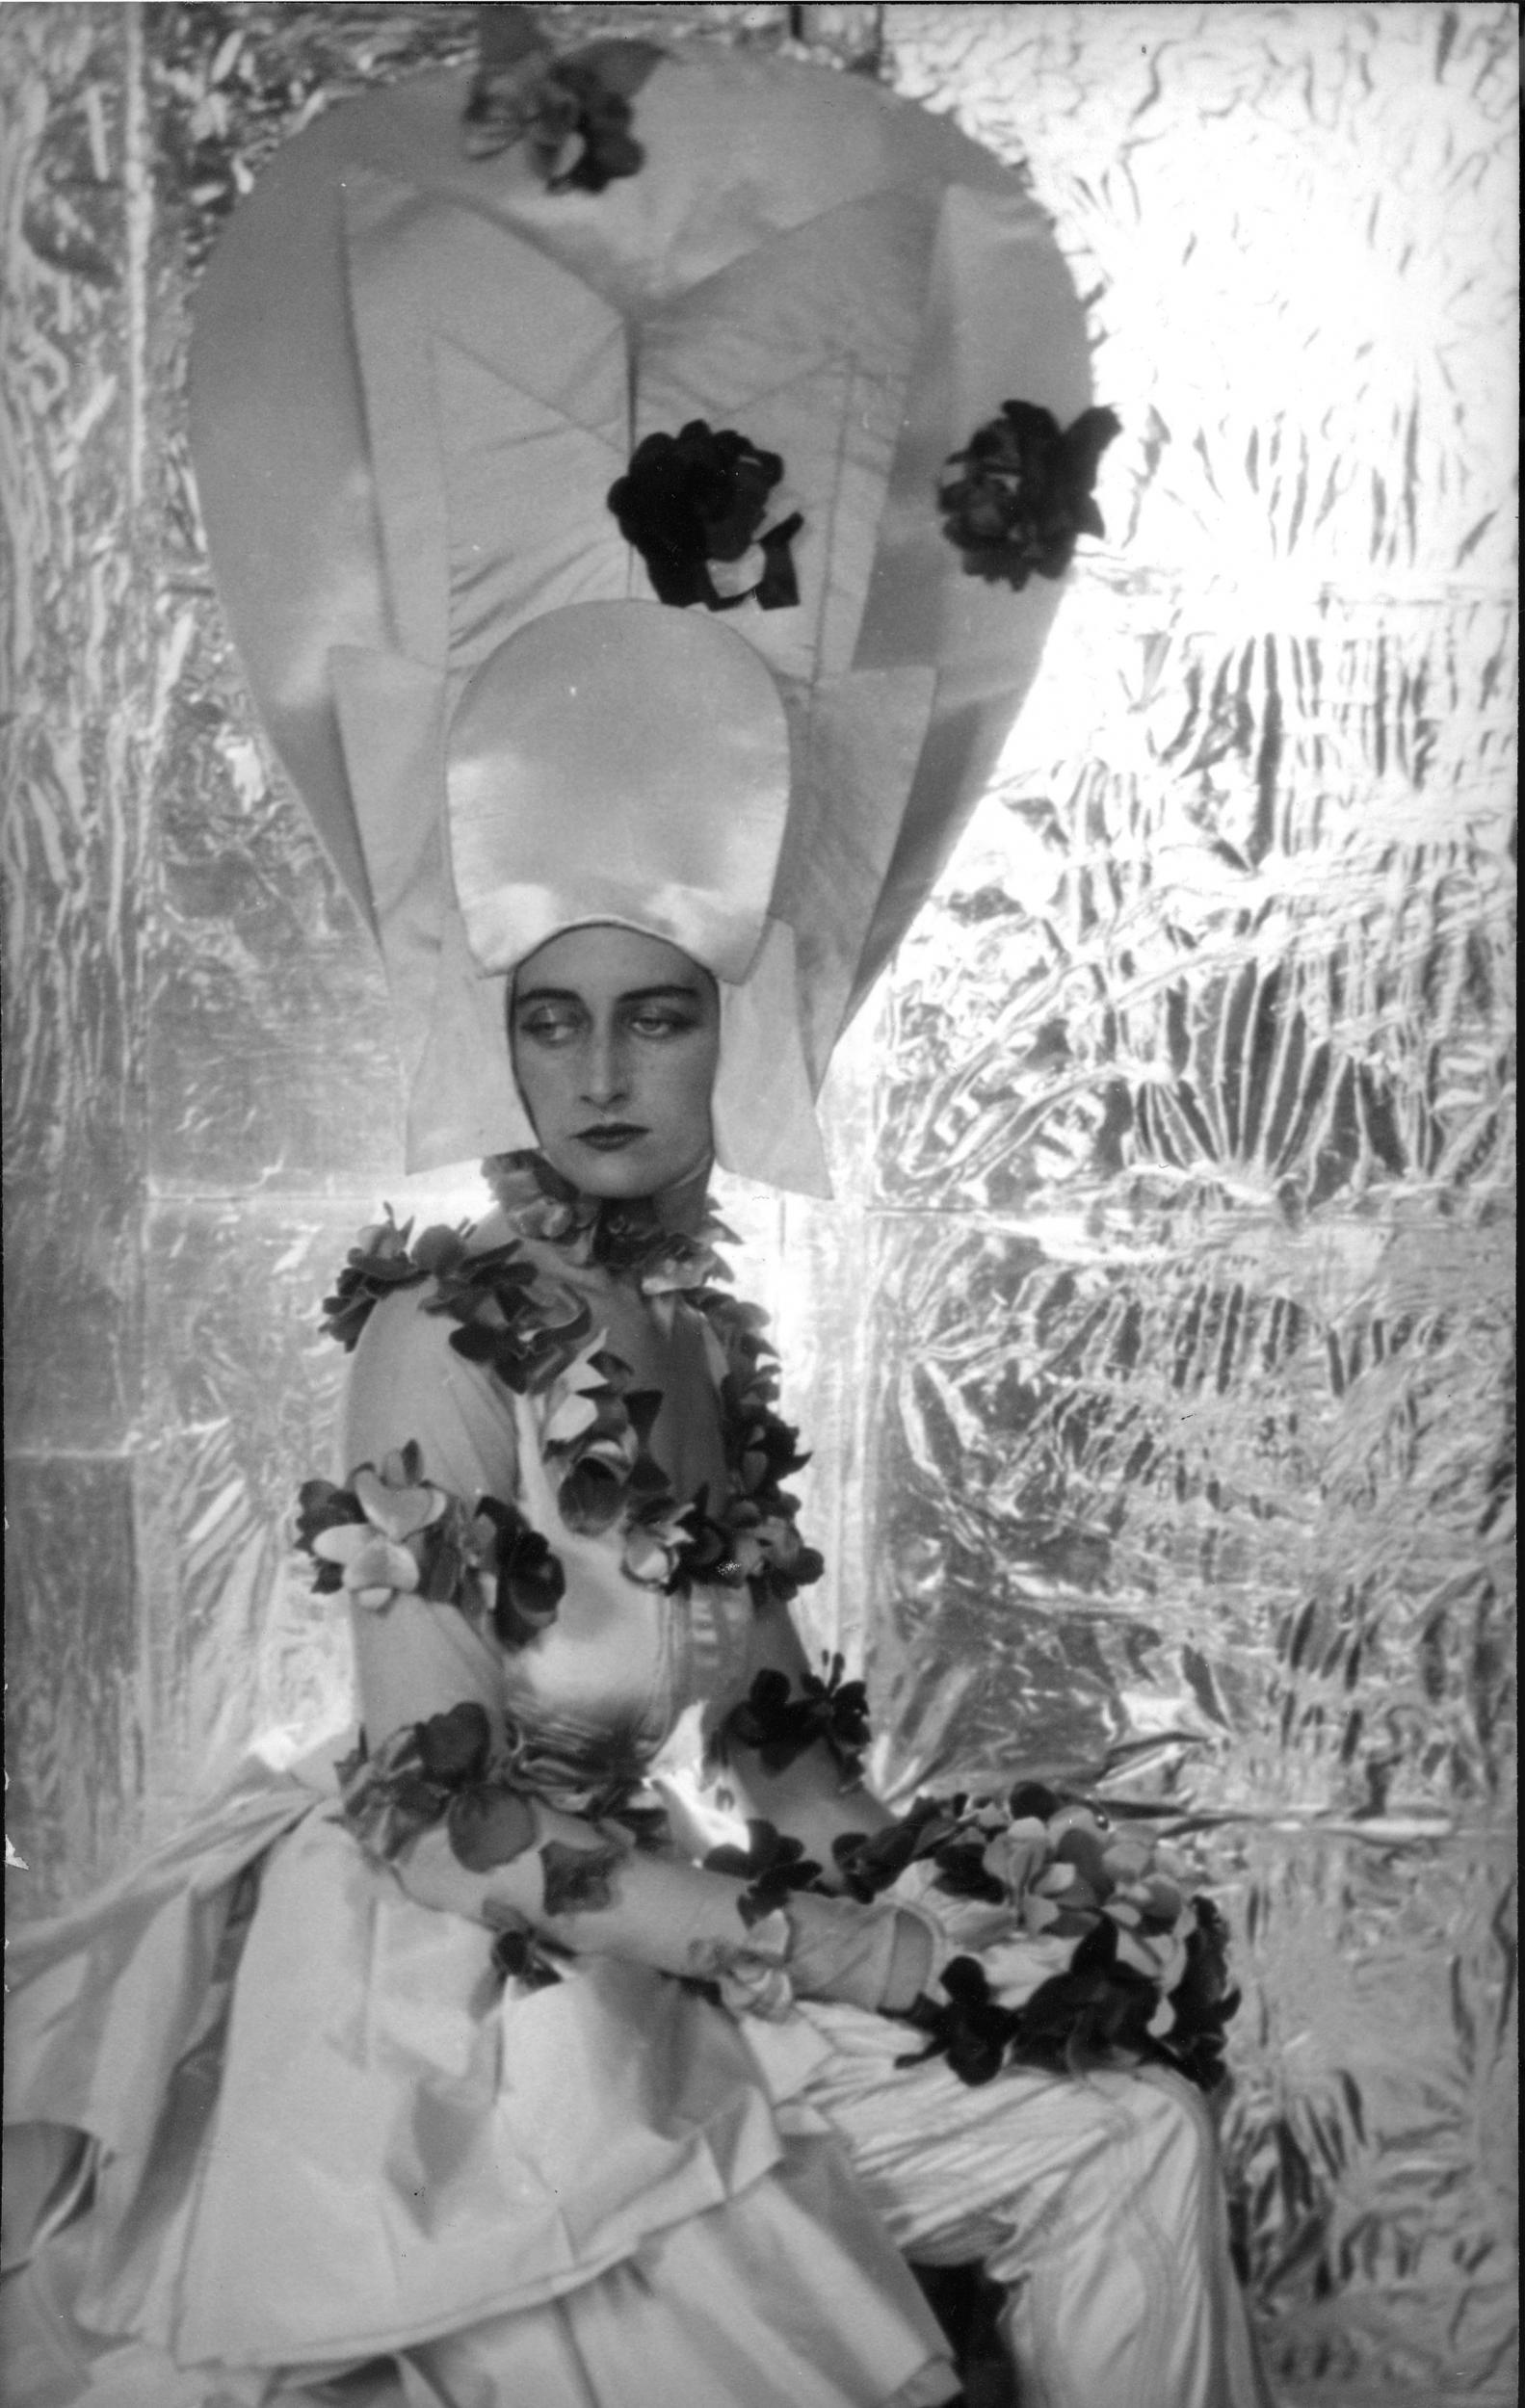 Maxine Freeman-Thomas dressed for Ascot in the year 2000 for the Dream of Fair Women Ball by Cecil Beaton, 1928